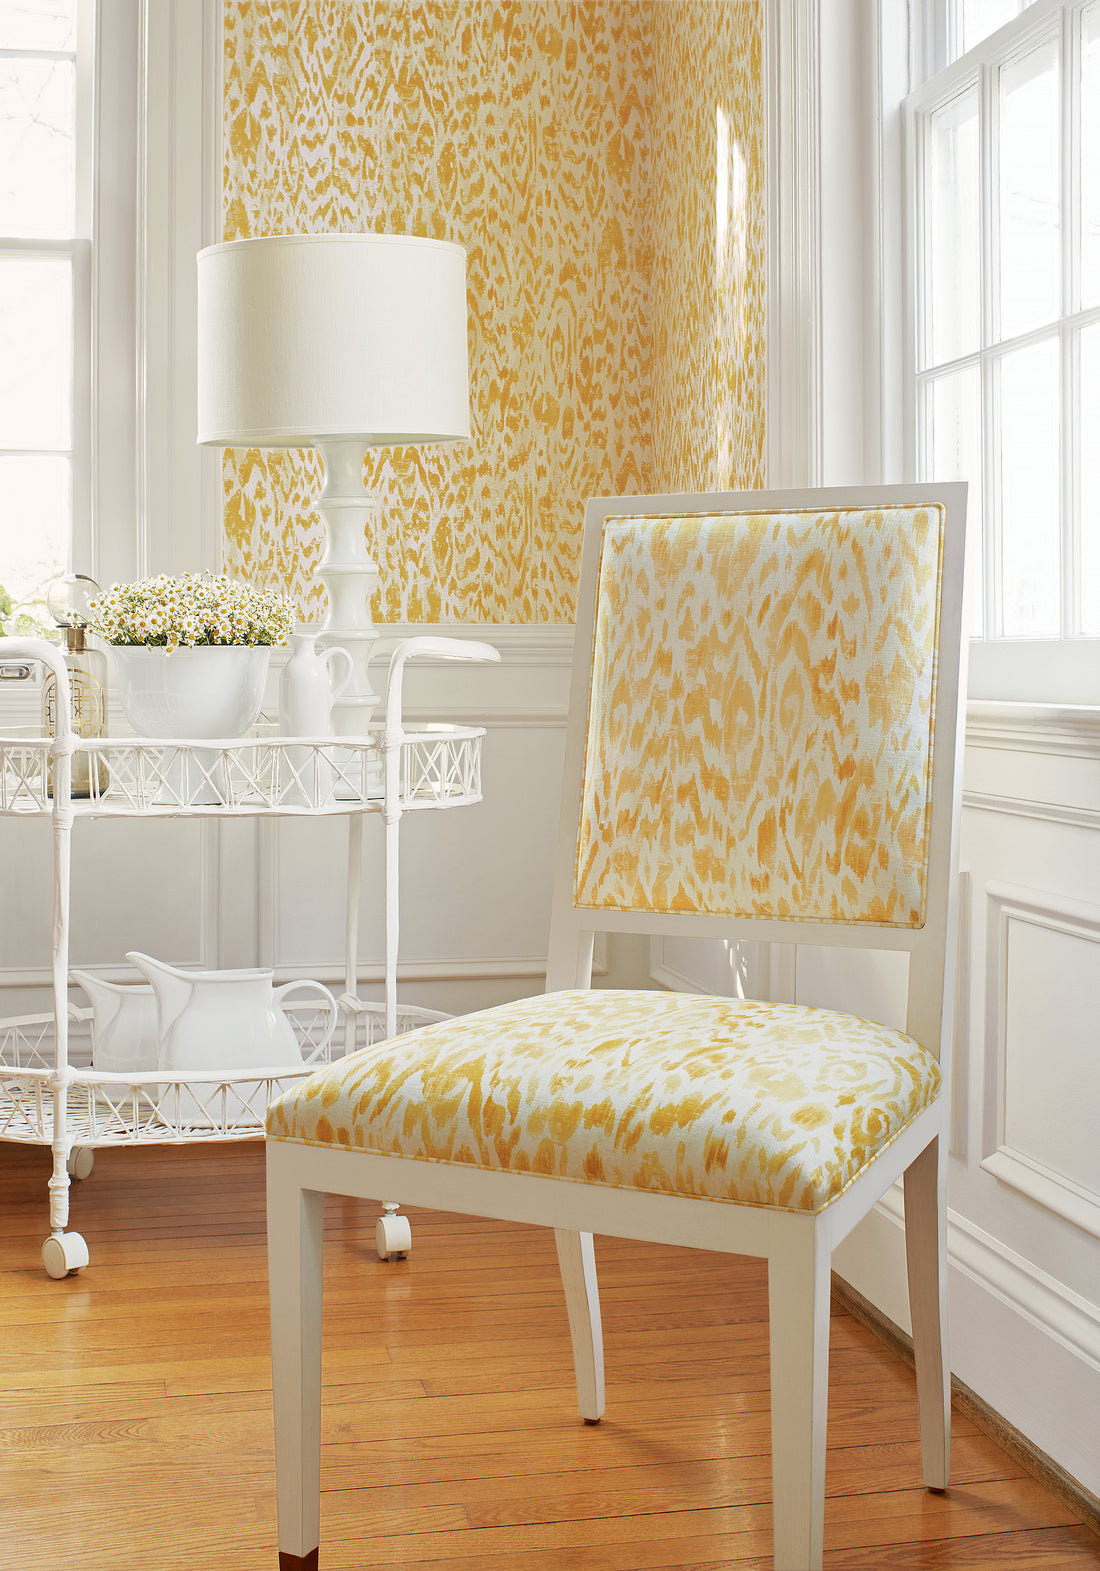 Lauderdale Dining Chair in Carlotta print fabric in yellow color - pattern number F975457 by Thibaut in the Dynasty collection